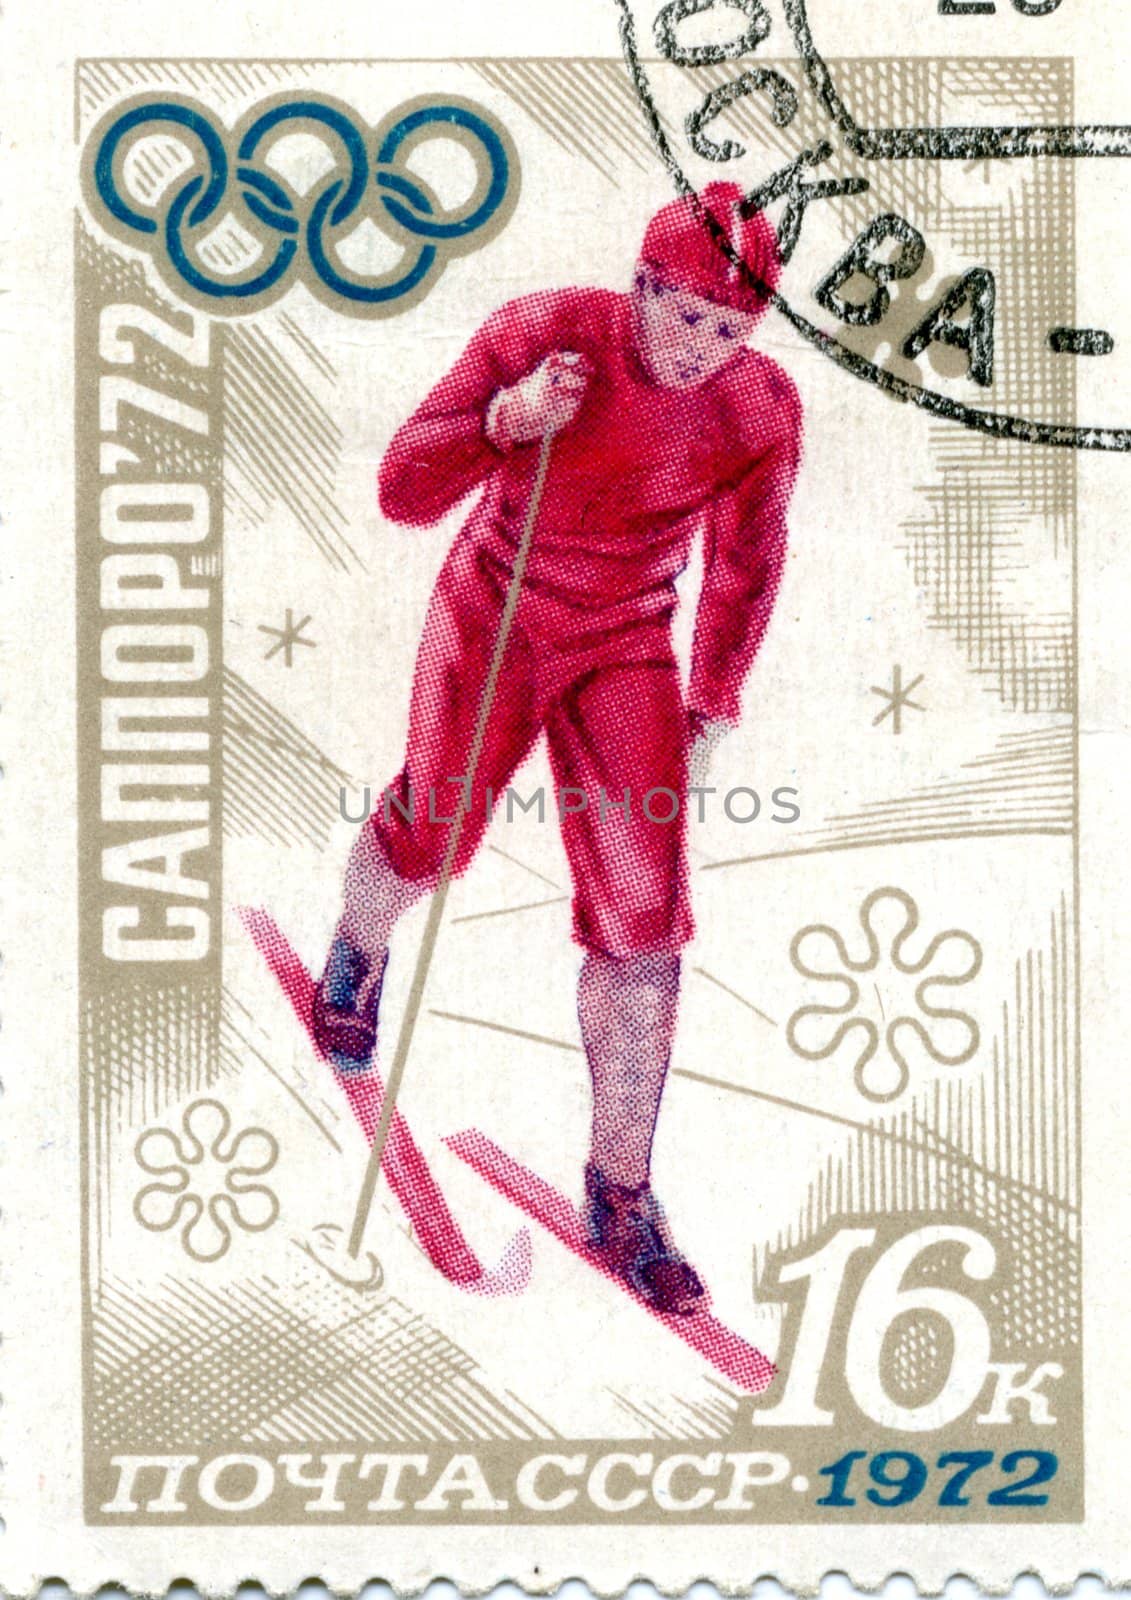 Vintage stamp with a man on skiis